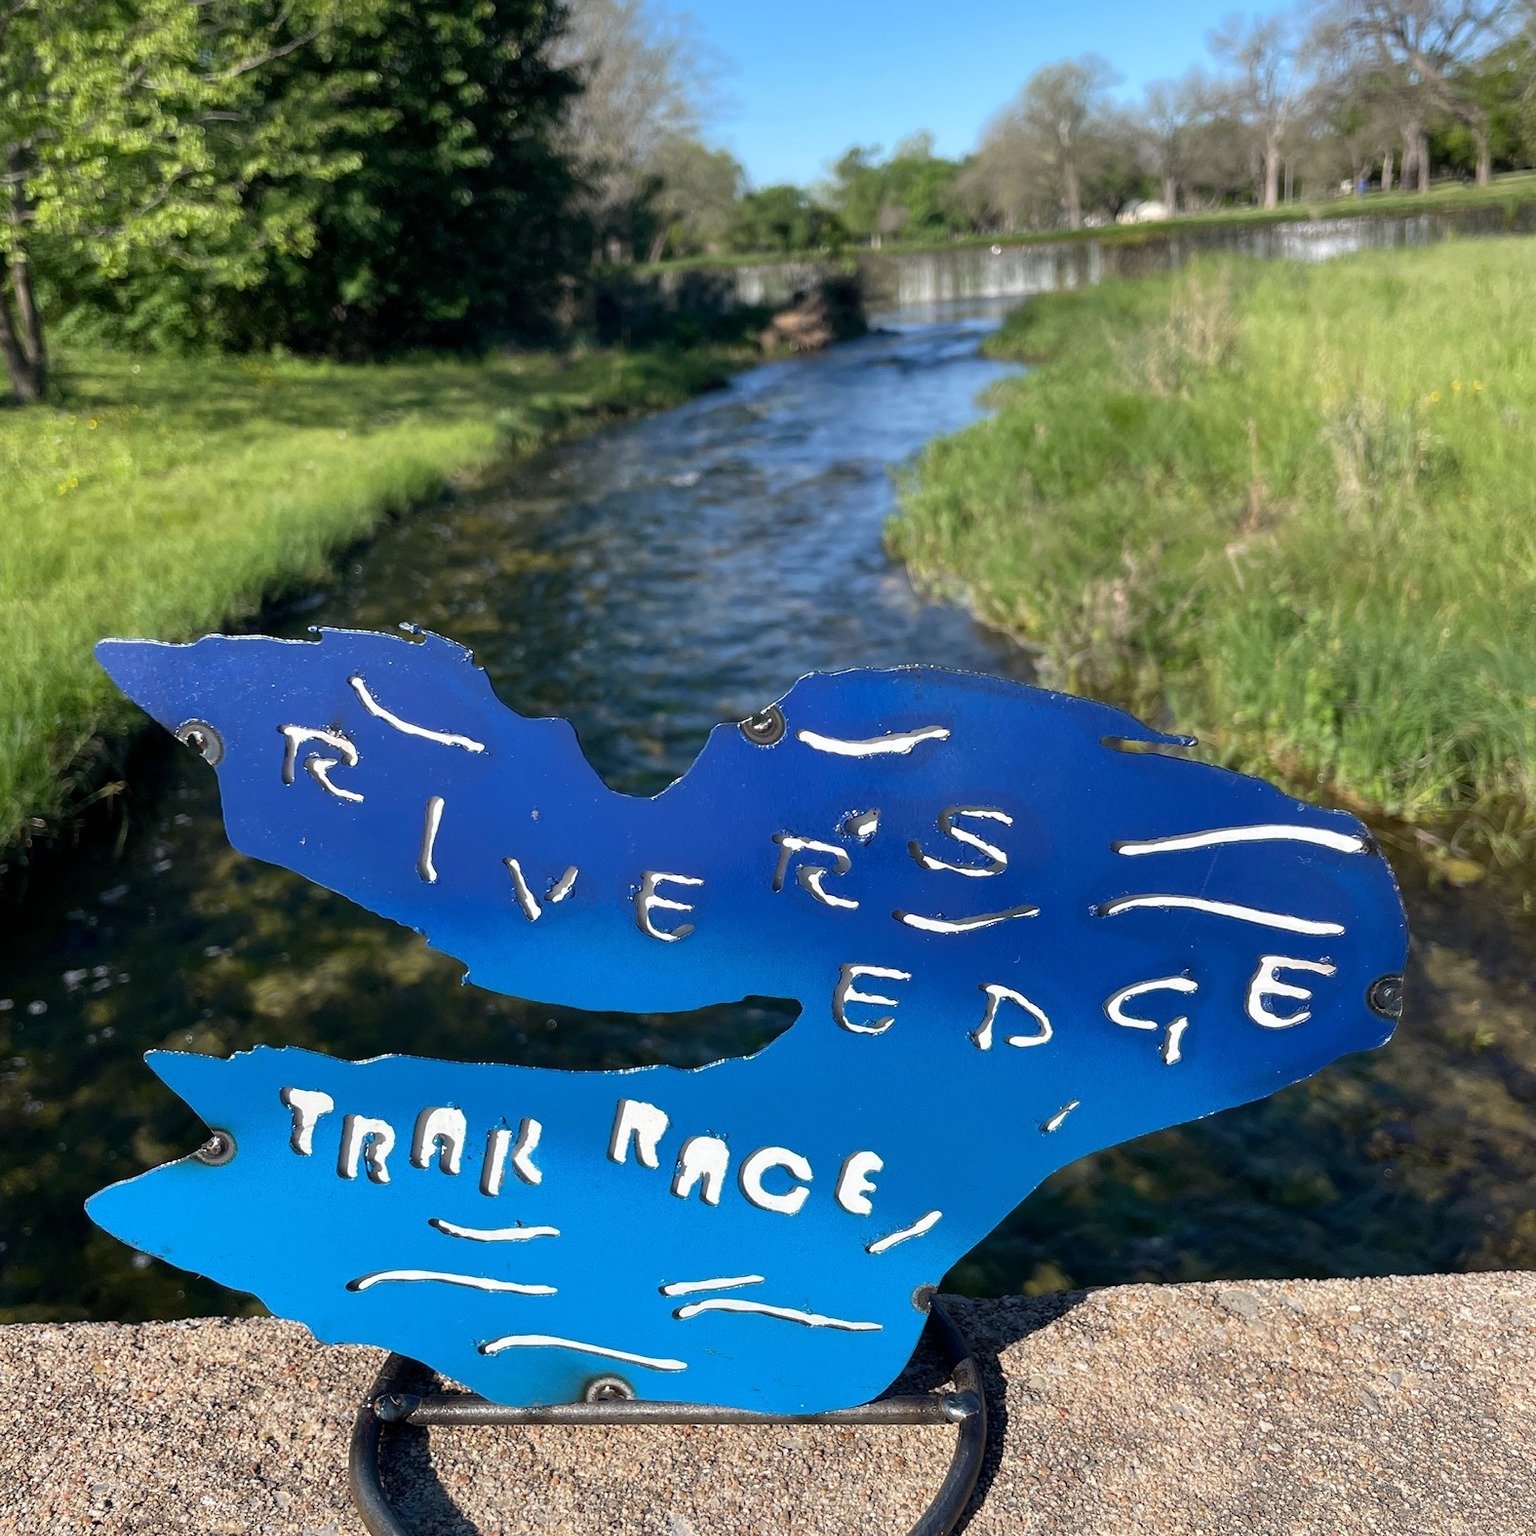 Come out to River's Edge Race on May 25 in Georgetown and maybe you'll snag one of these super cool race awards.
#tejastrails #georgetowntrailrunning #irundirt #cooltrophies